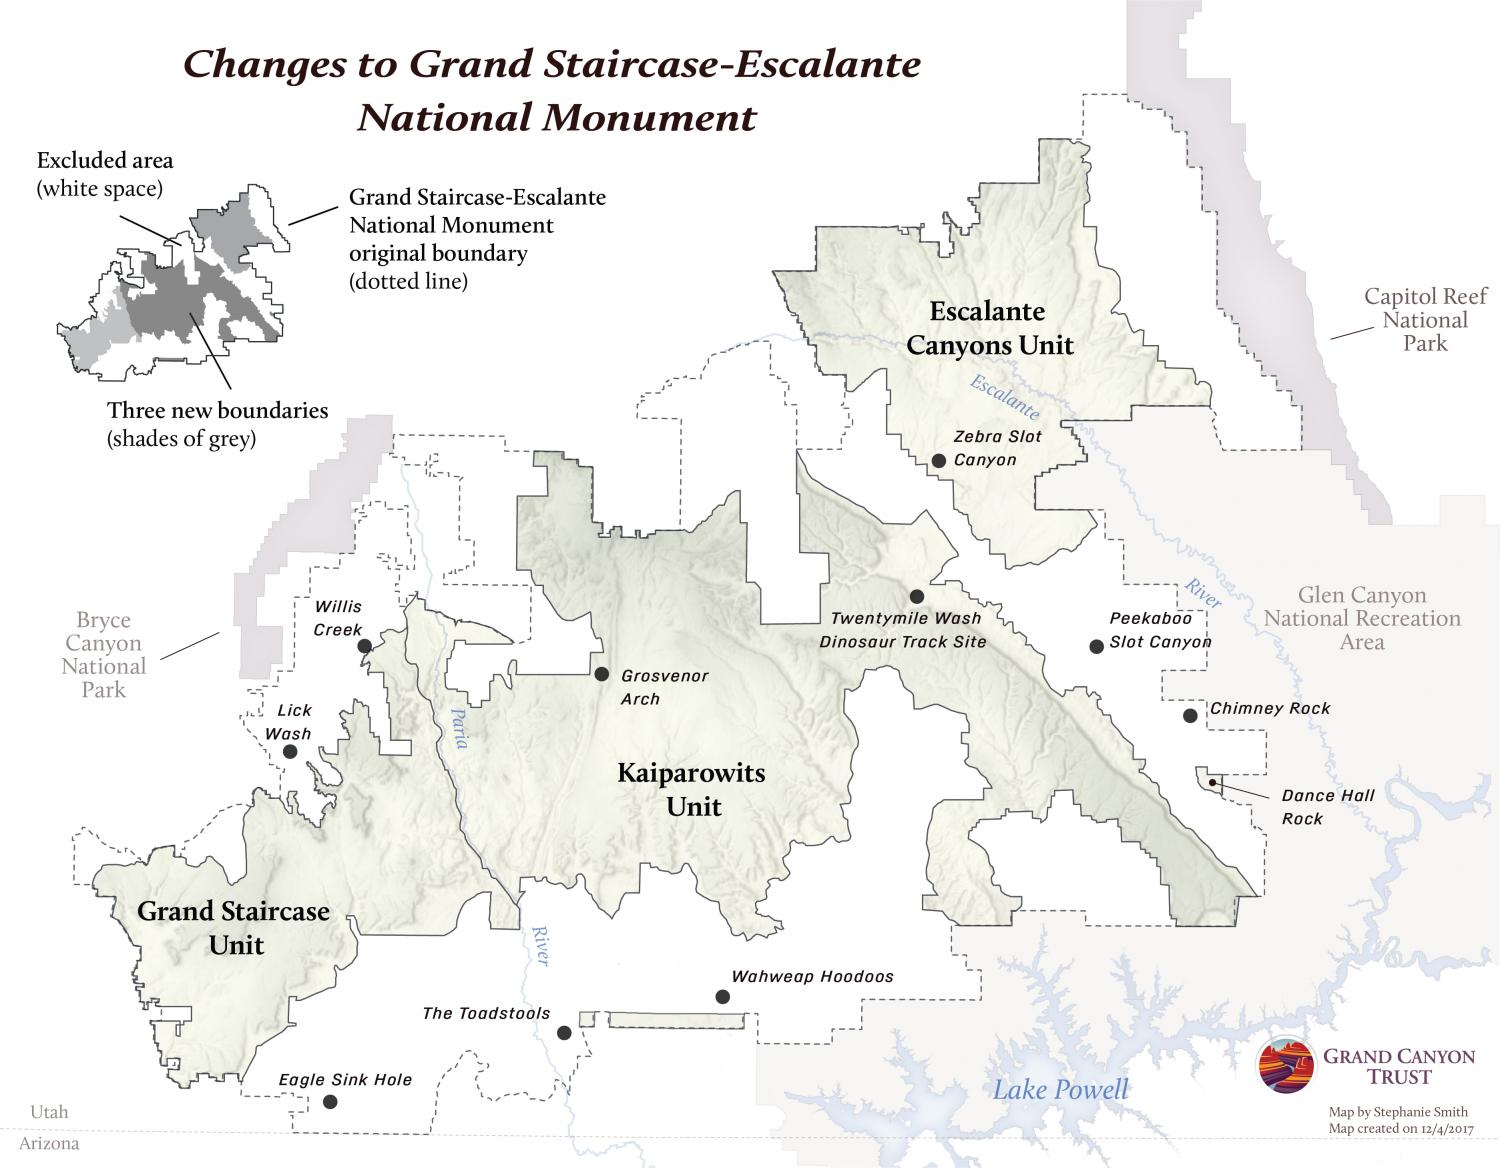 Map of the changes to Grand Staircase-Escalante National Monument